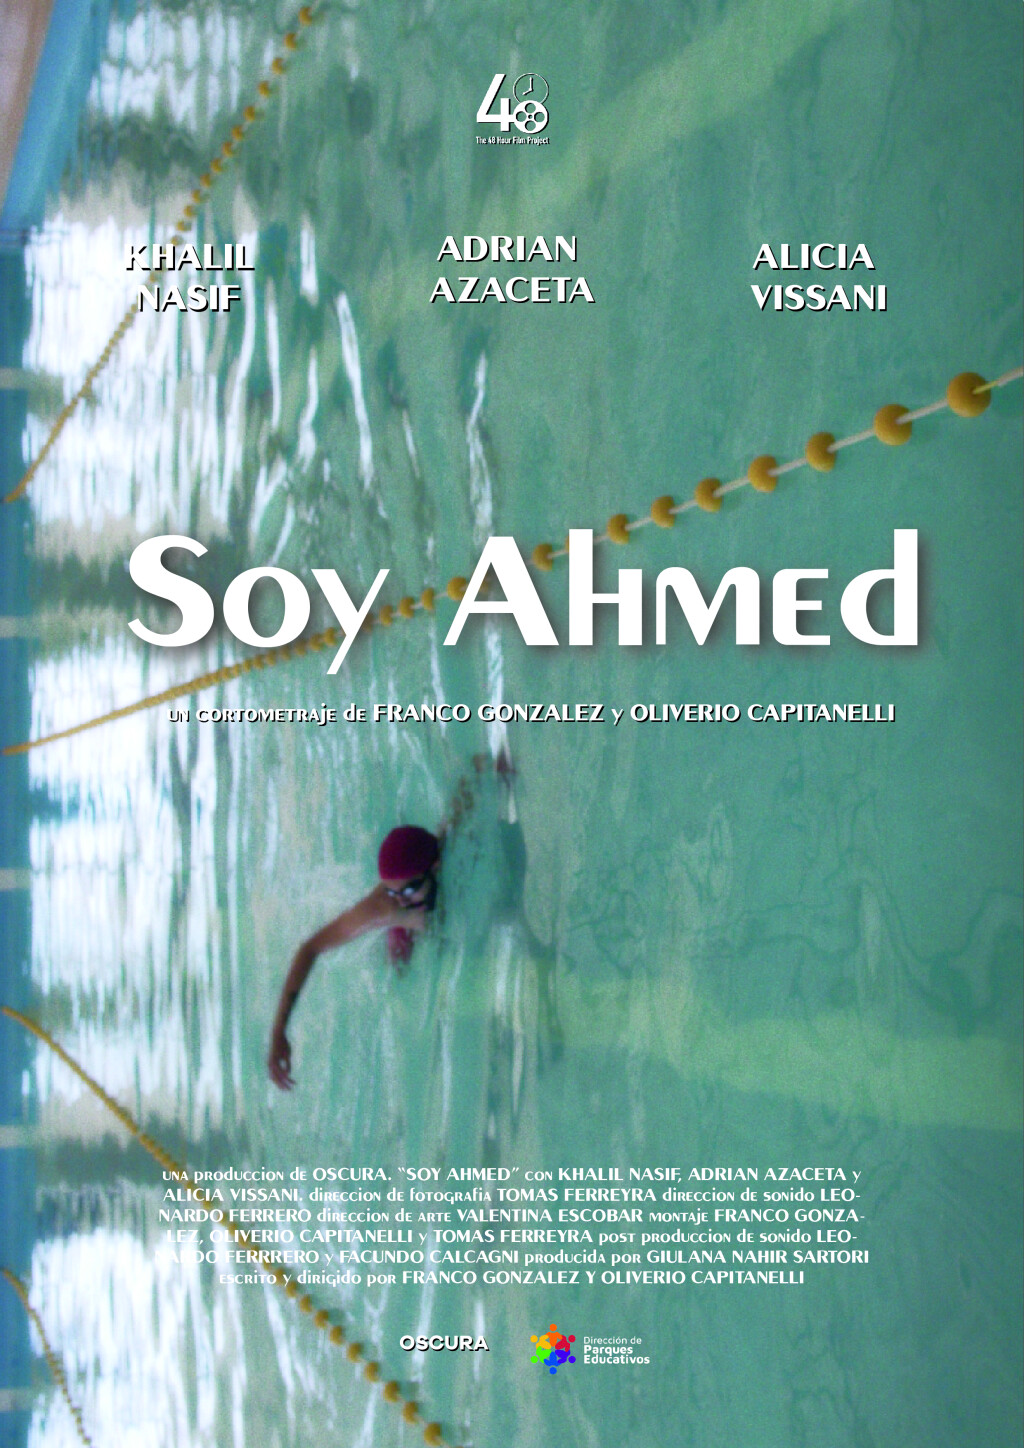 Filmposter for Soy Ahmed